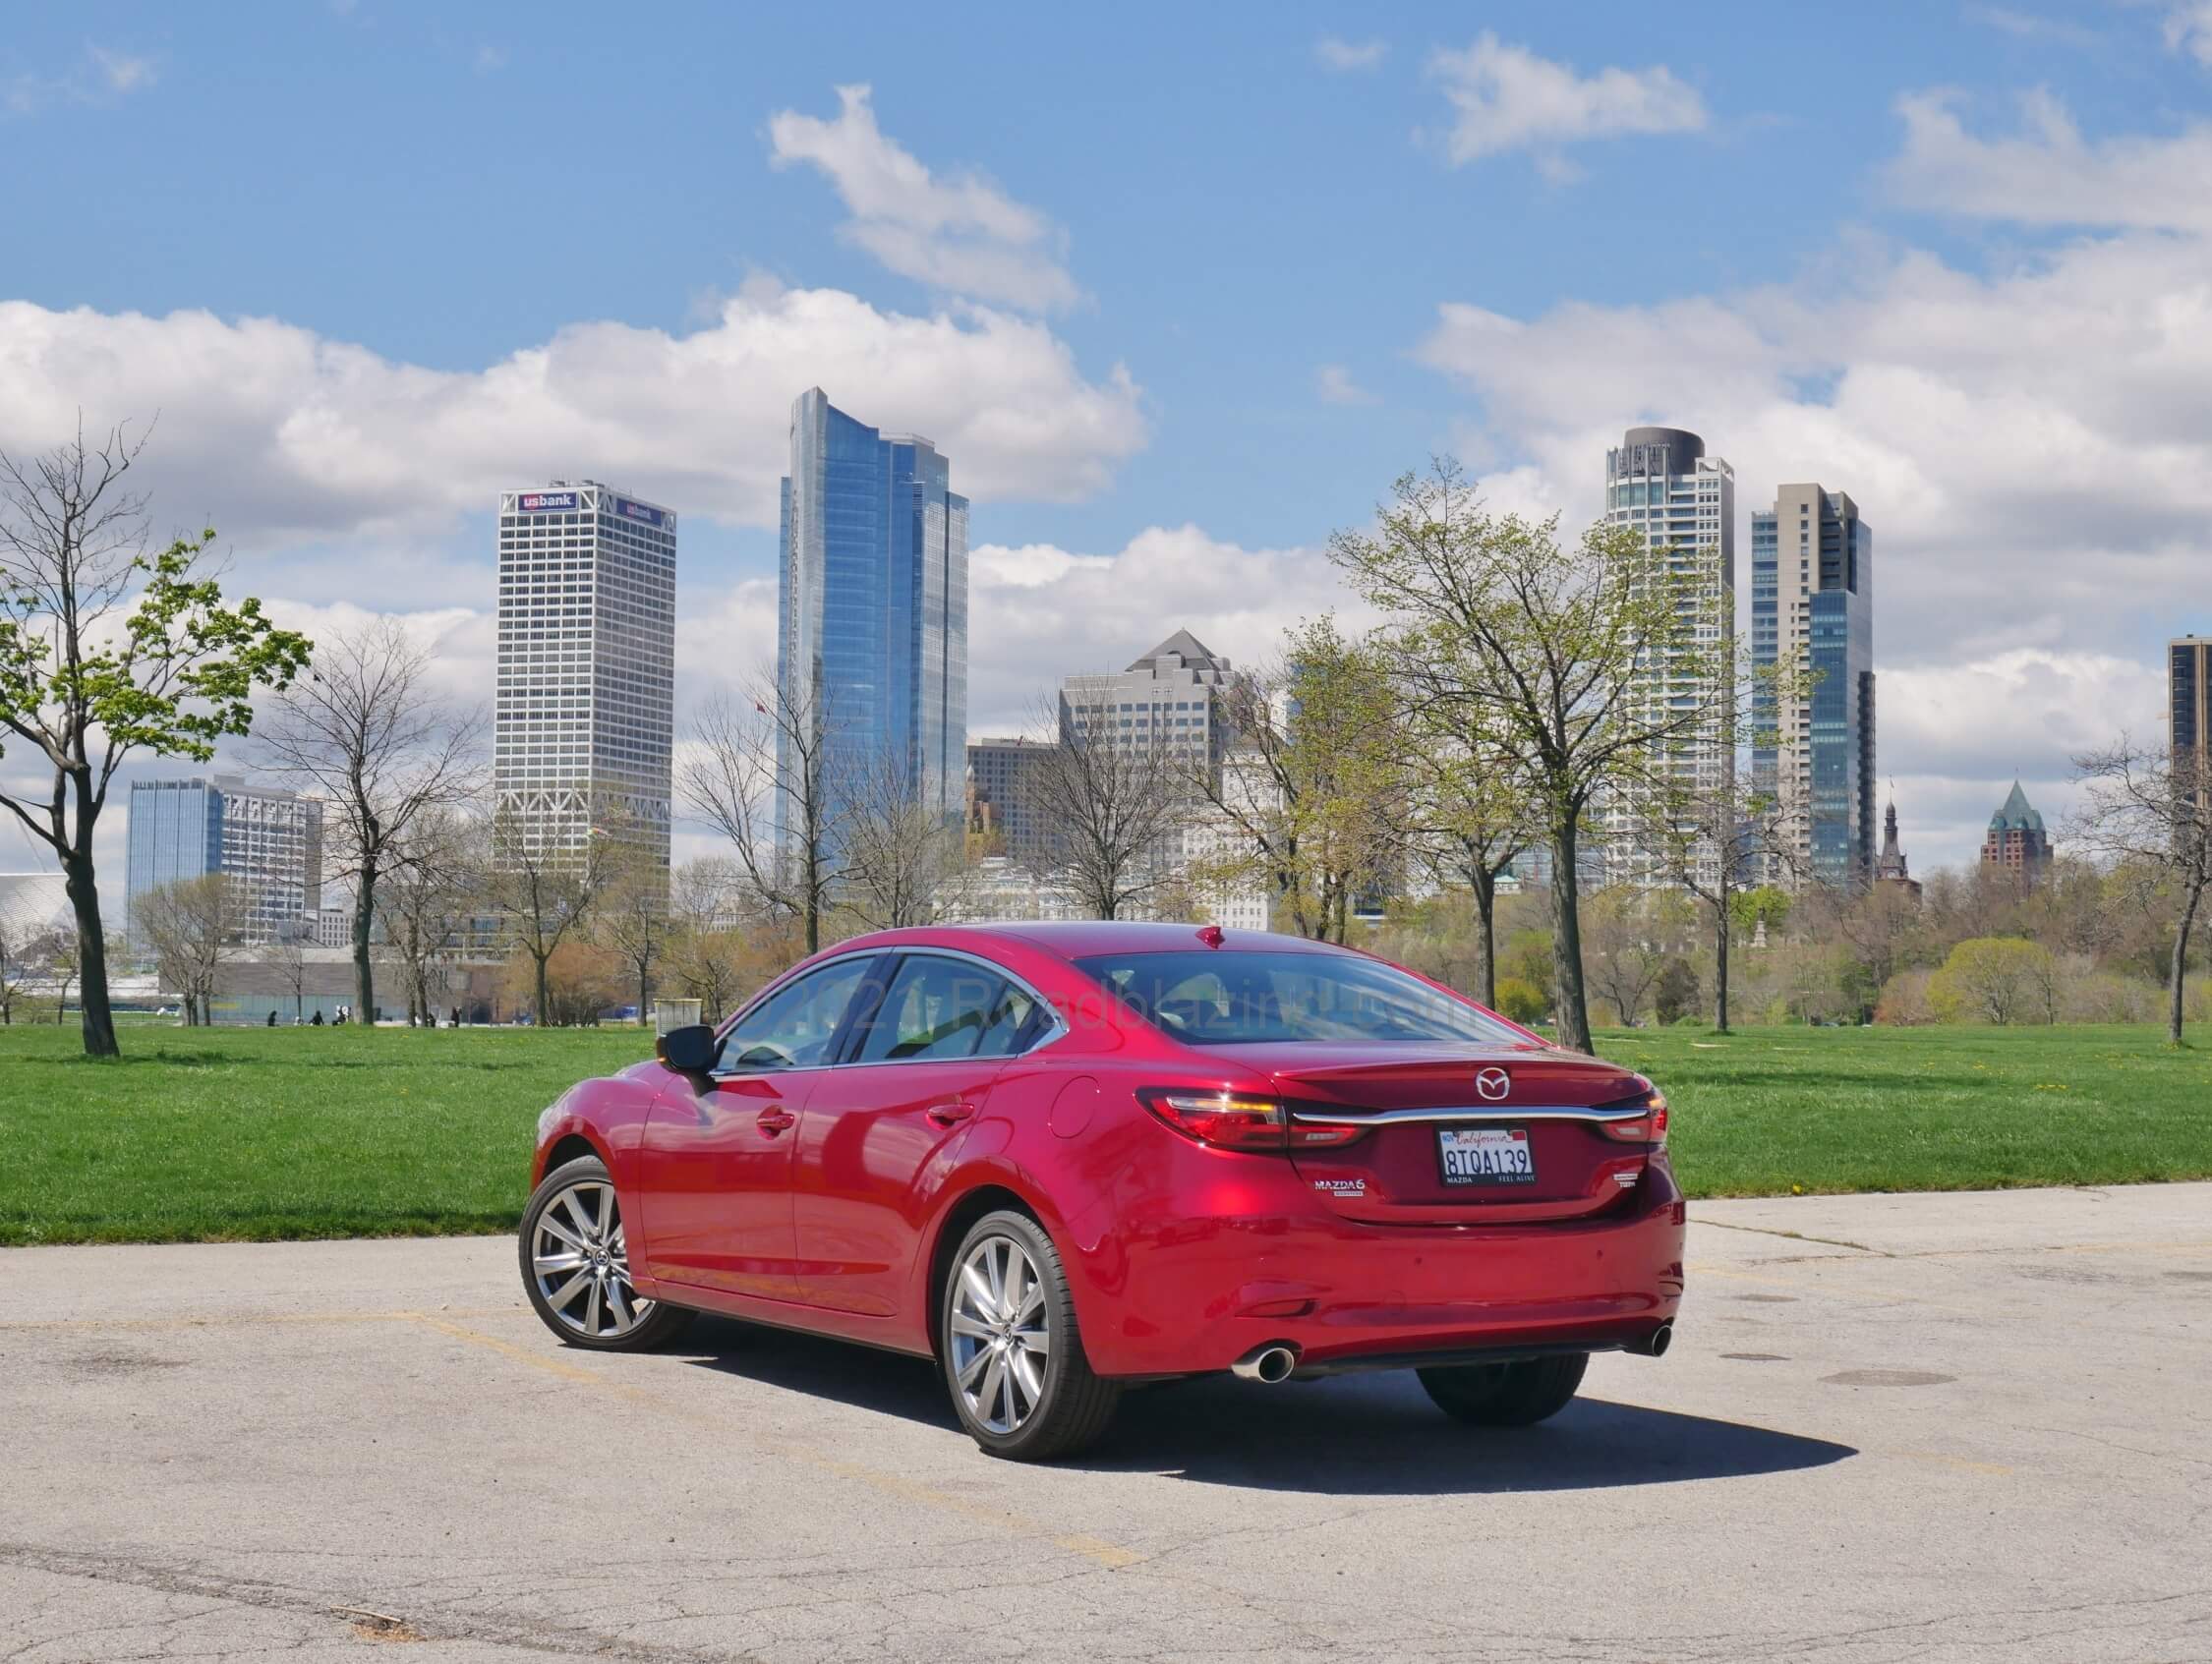 2021 Mazda 6 Signature 2.5T: Cloaked in passionate Soul Crystal Red, the sensuous yet muscular profile basks in Milwaukee, Wisconsin's Lake Michigan lakefront.